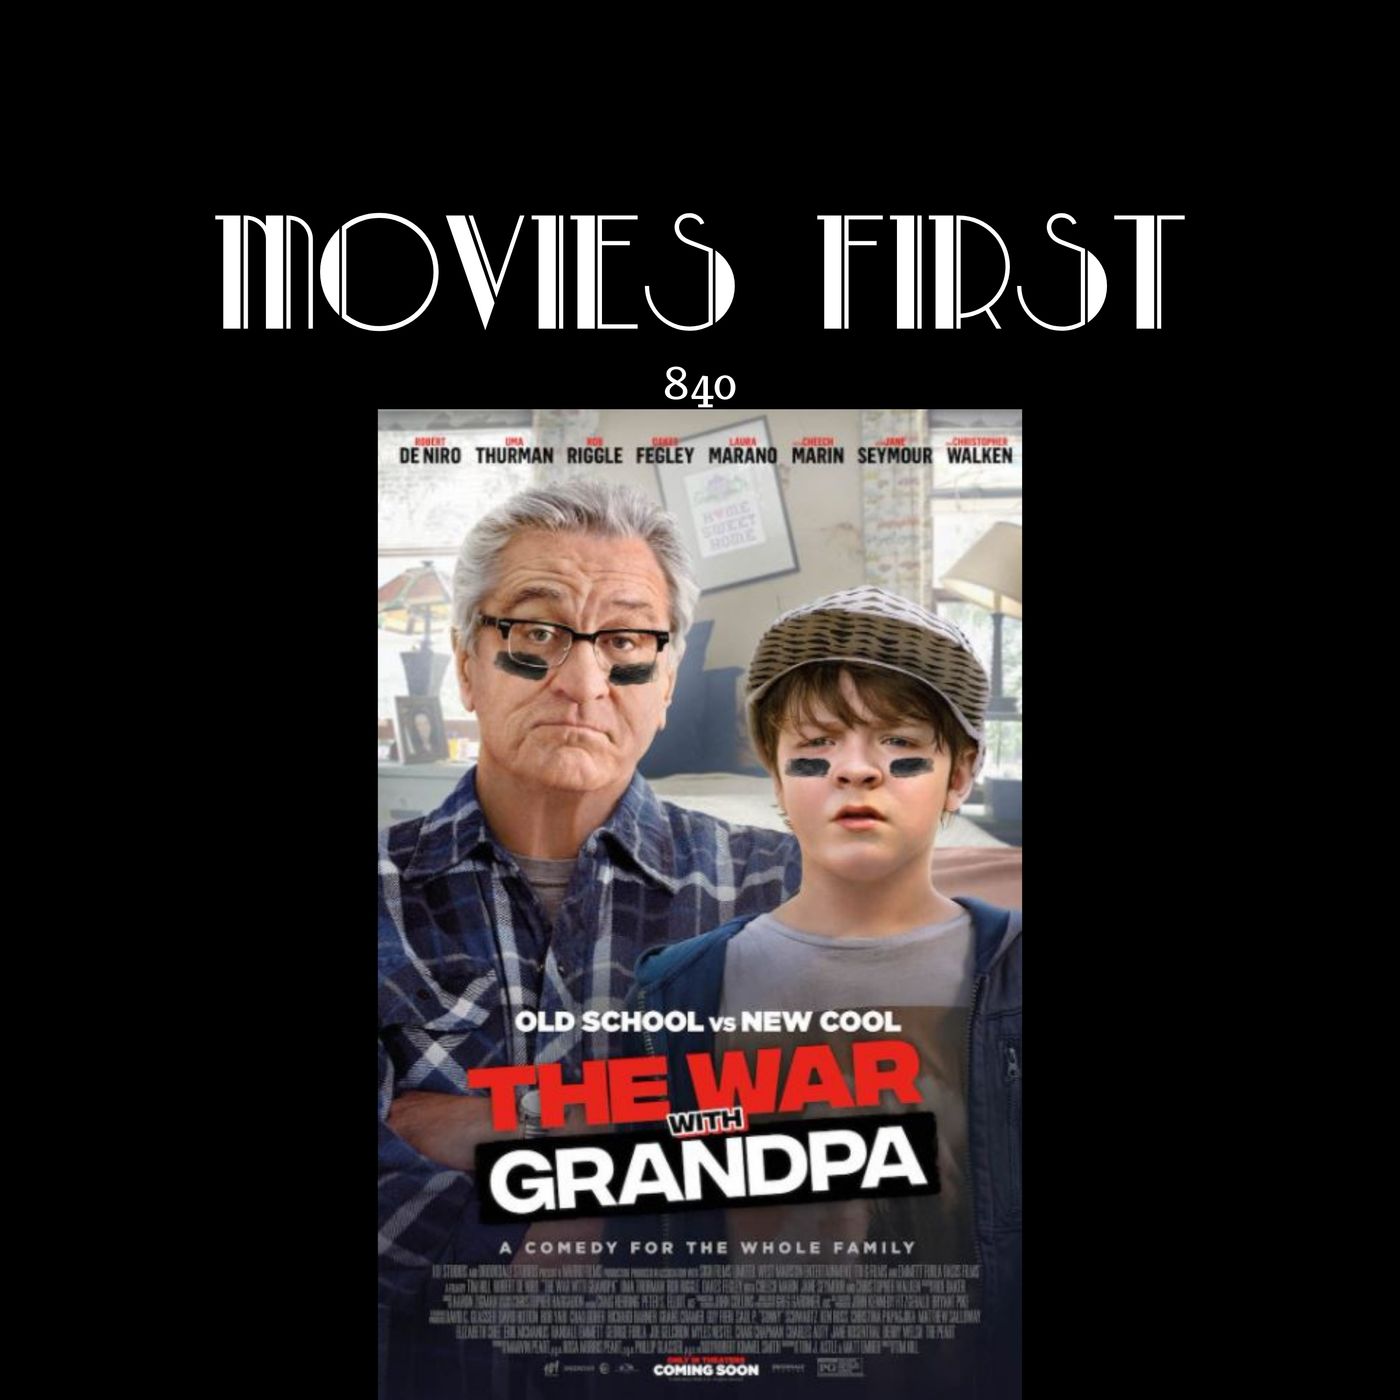 The War with Grandpa (Comedy, Drama, Family) (the @MoviesFirst review)